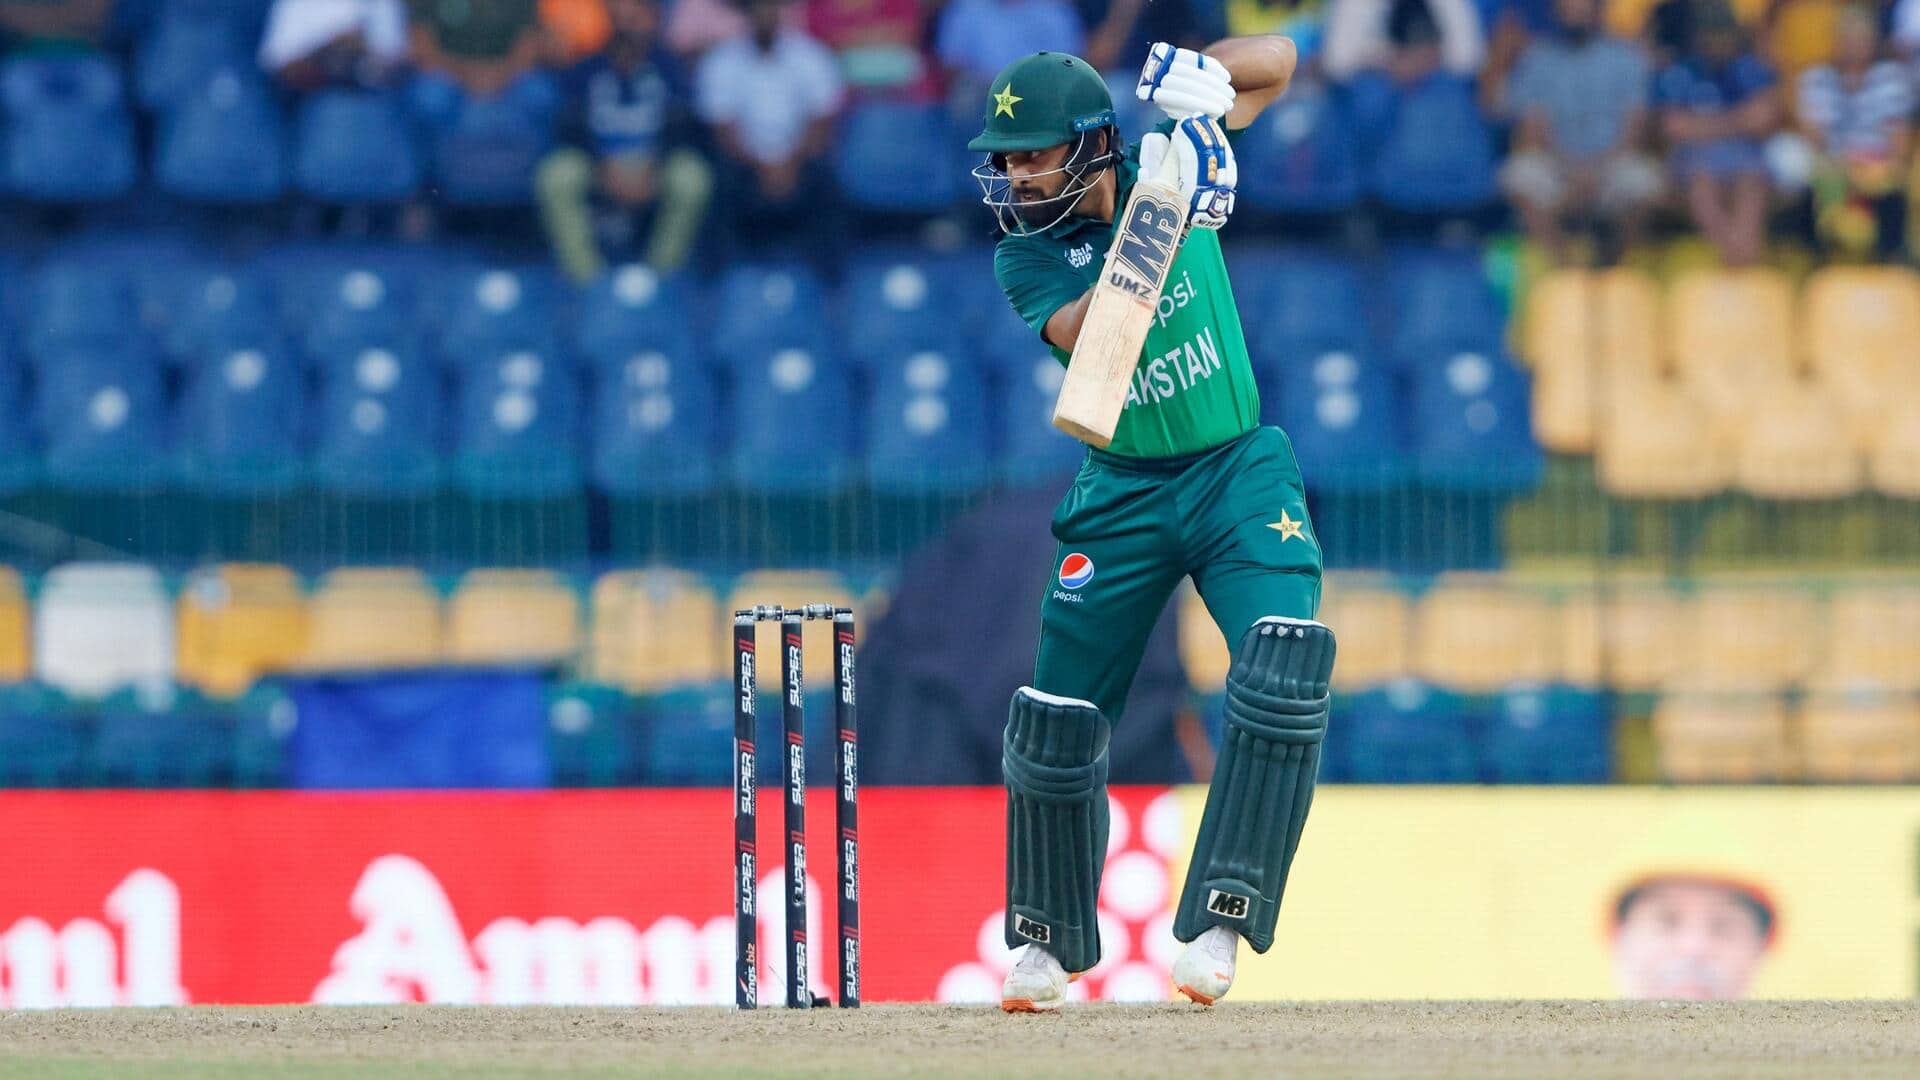 Asia Cup, Abdullah Shafique slams his maiden ODI fifty: Stats